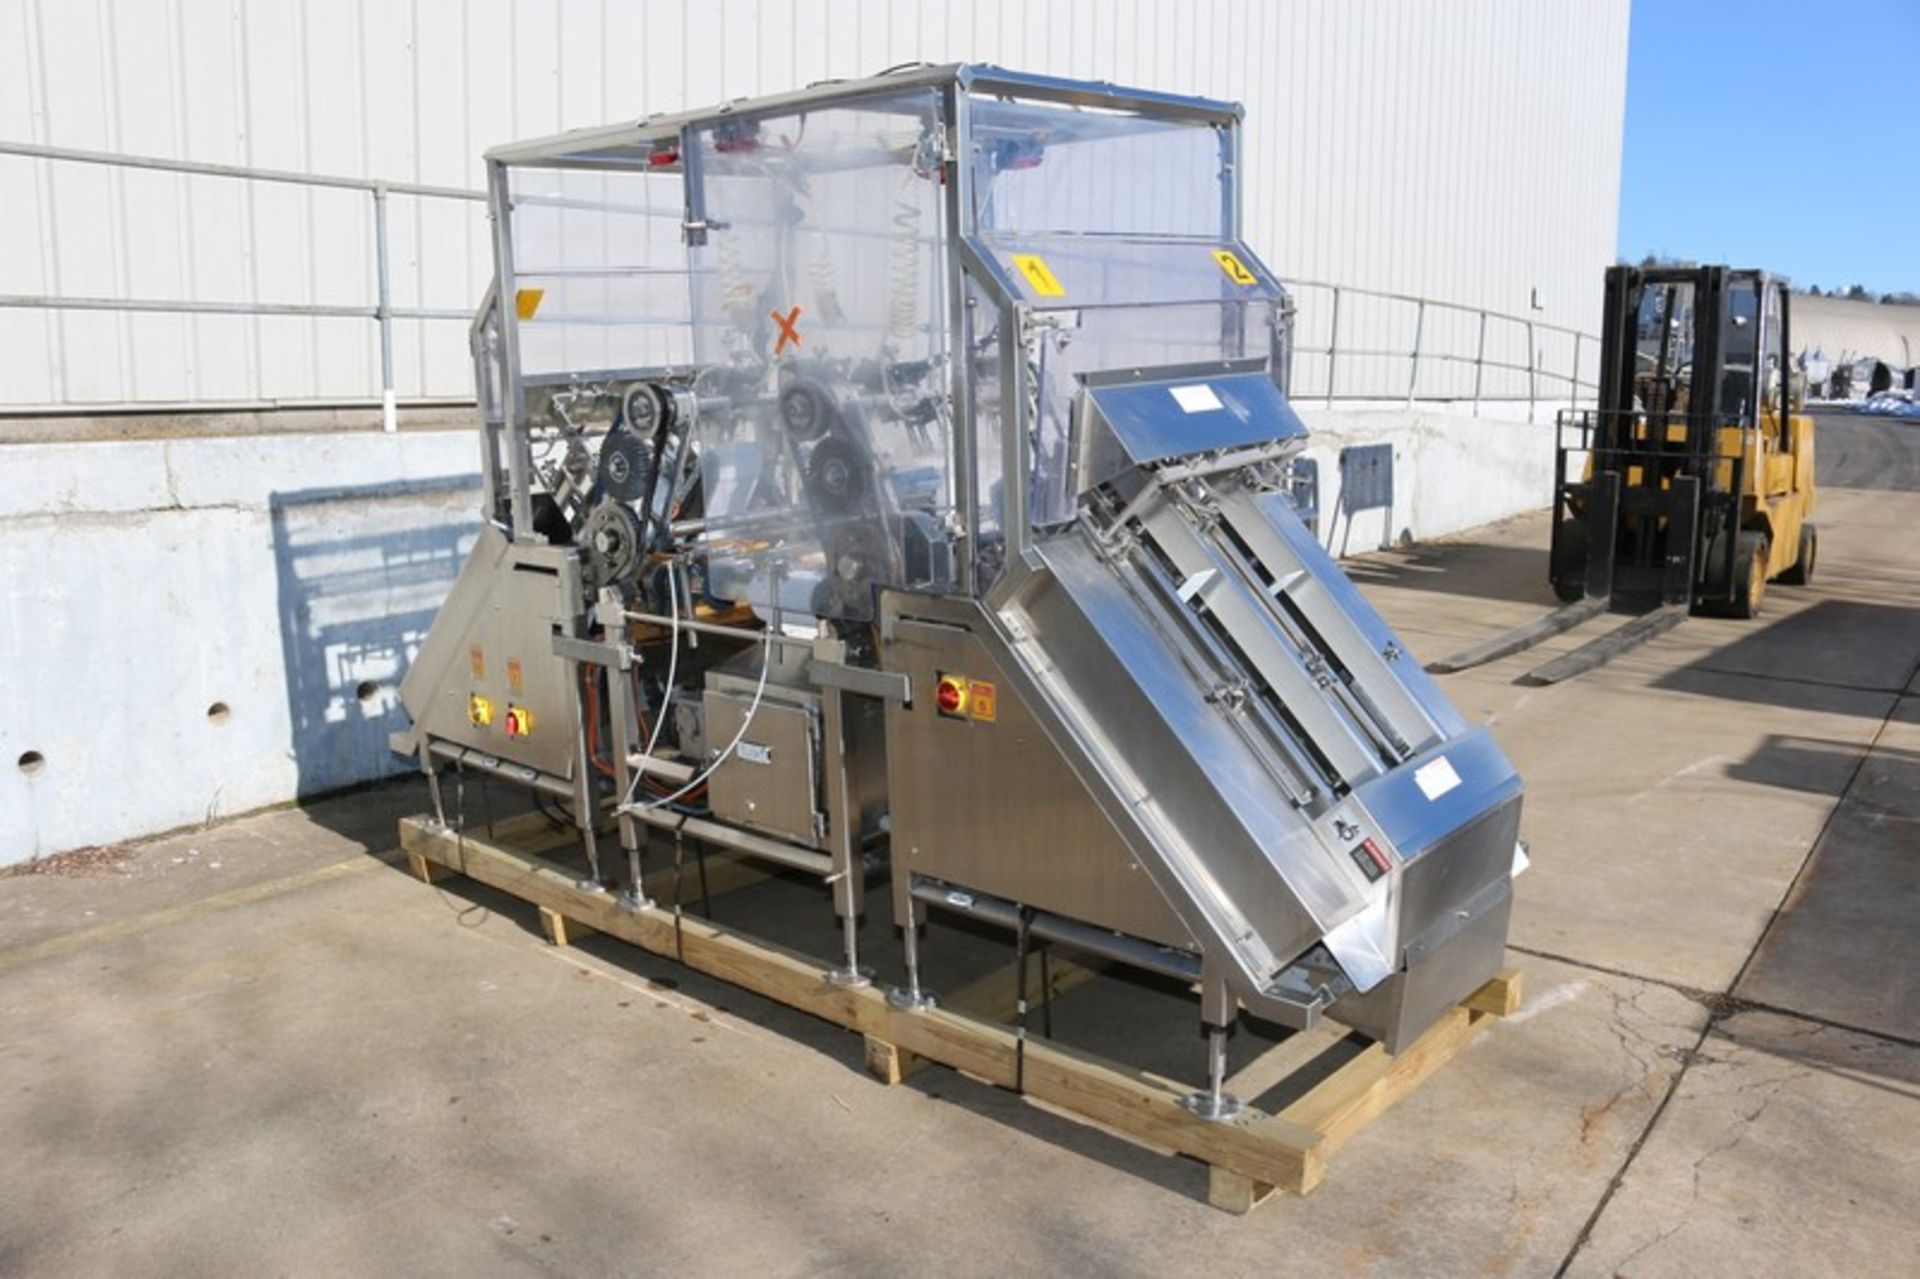 Raque S/S Tray Dispenser, 2-Lanes of Aprox. 8" W Outfeed Conveyor, with 4-Head Pick N' Place - Image 4 of 11